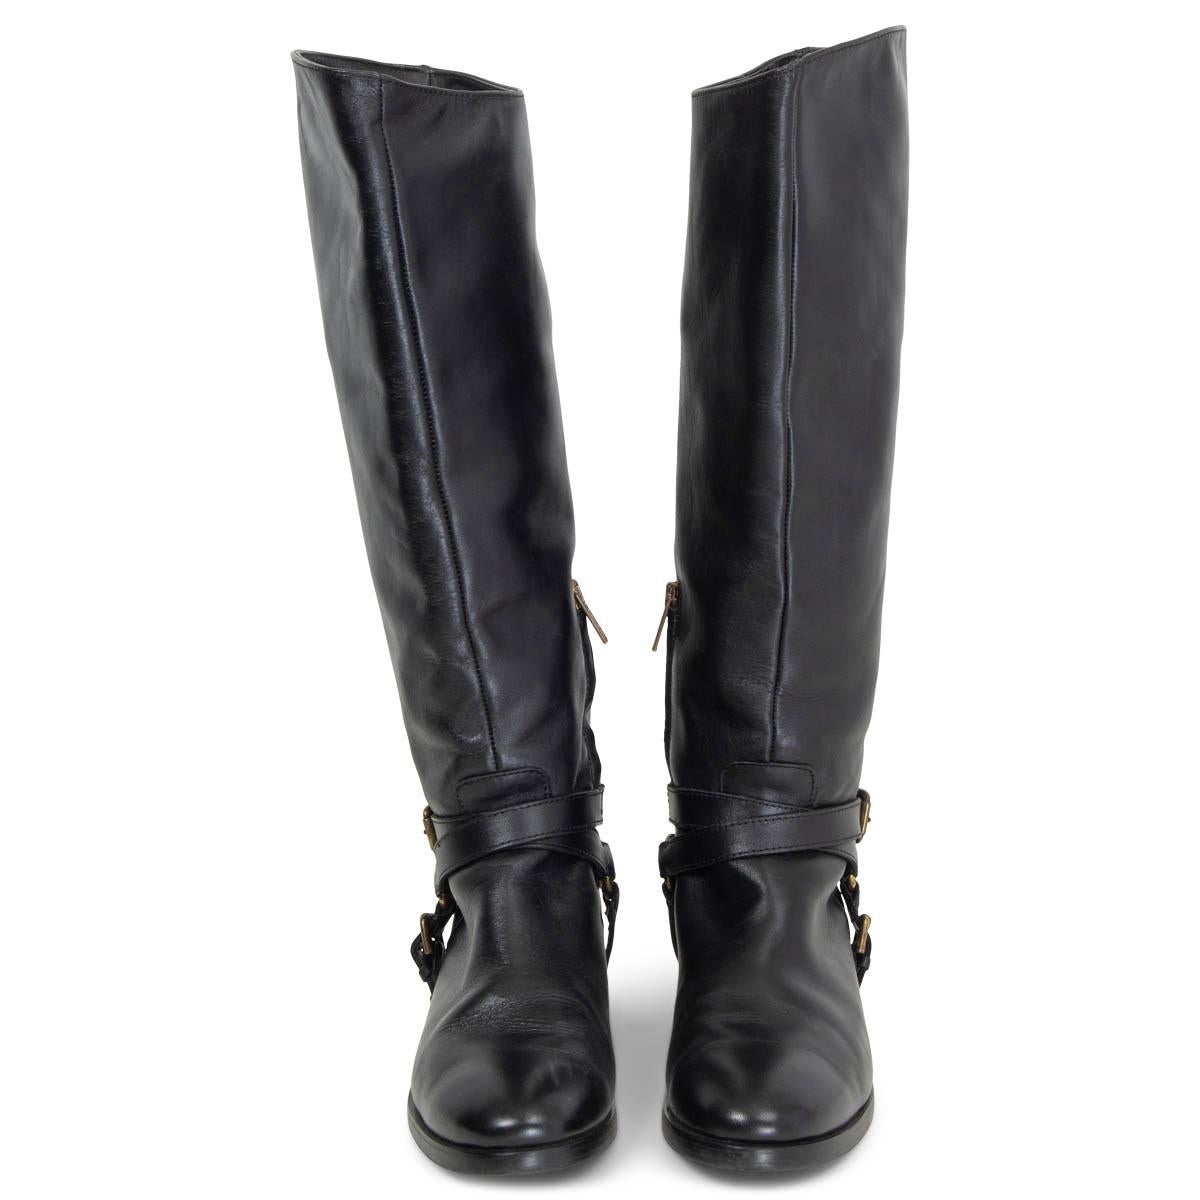 100% authentic McQ Alexander McQueen rinding boots in black smooth calfskin with belted chain embellishment in antique gold-tone metal. Have been worn and are in excellent condition. Come with dust bag. 

Measurements
Imprinted Size	39
Shoe